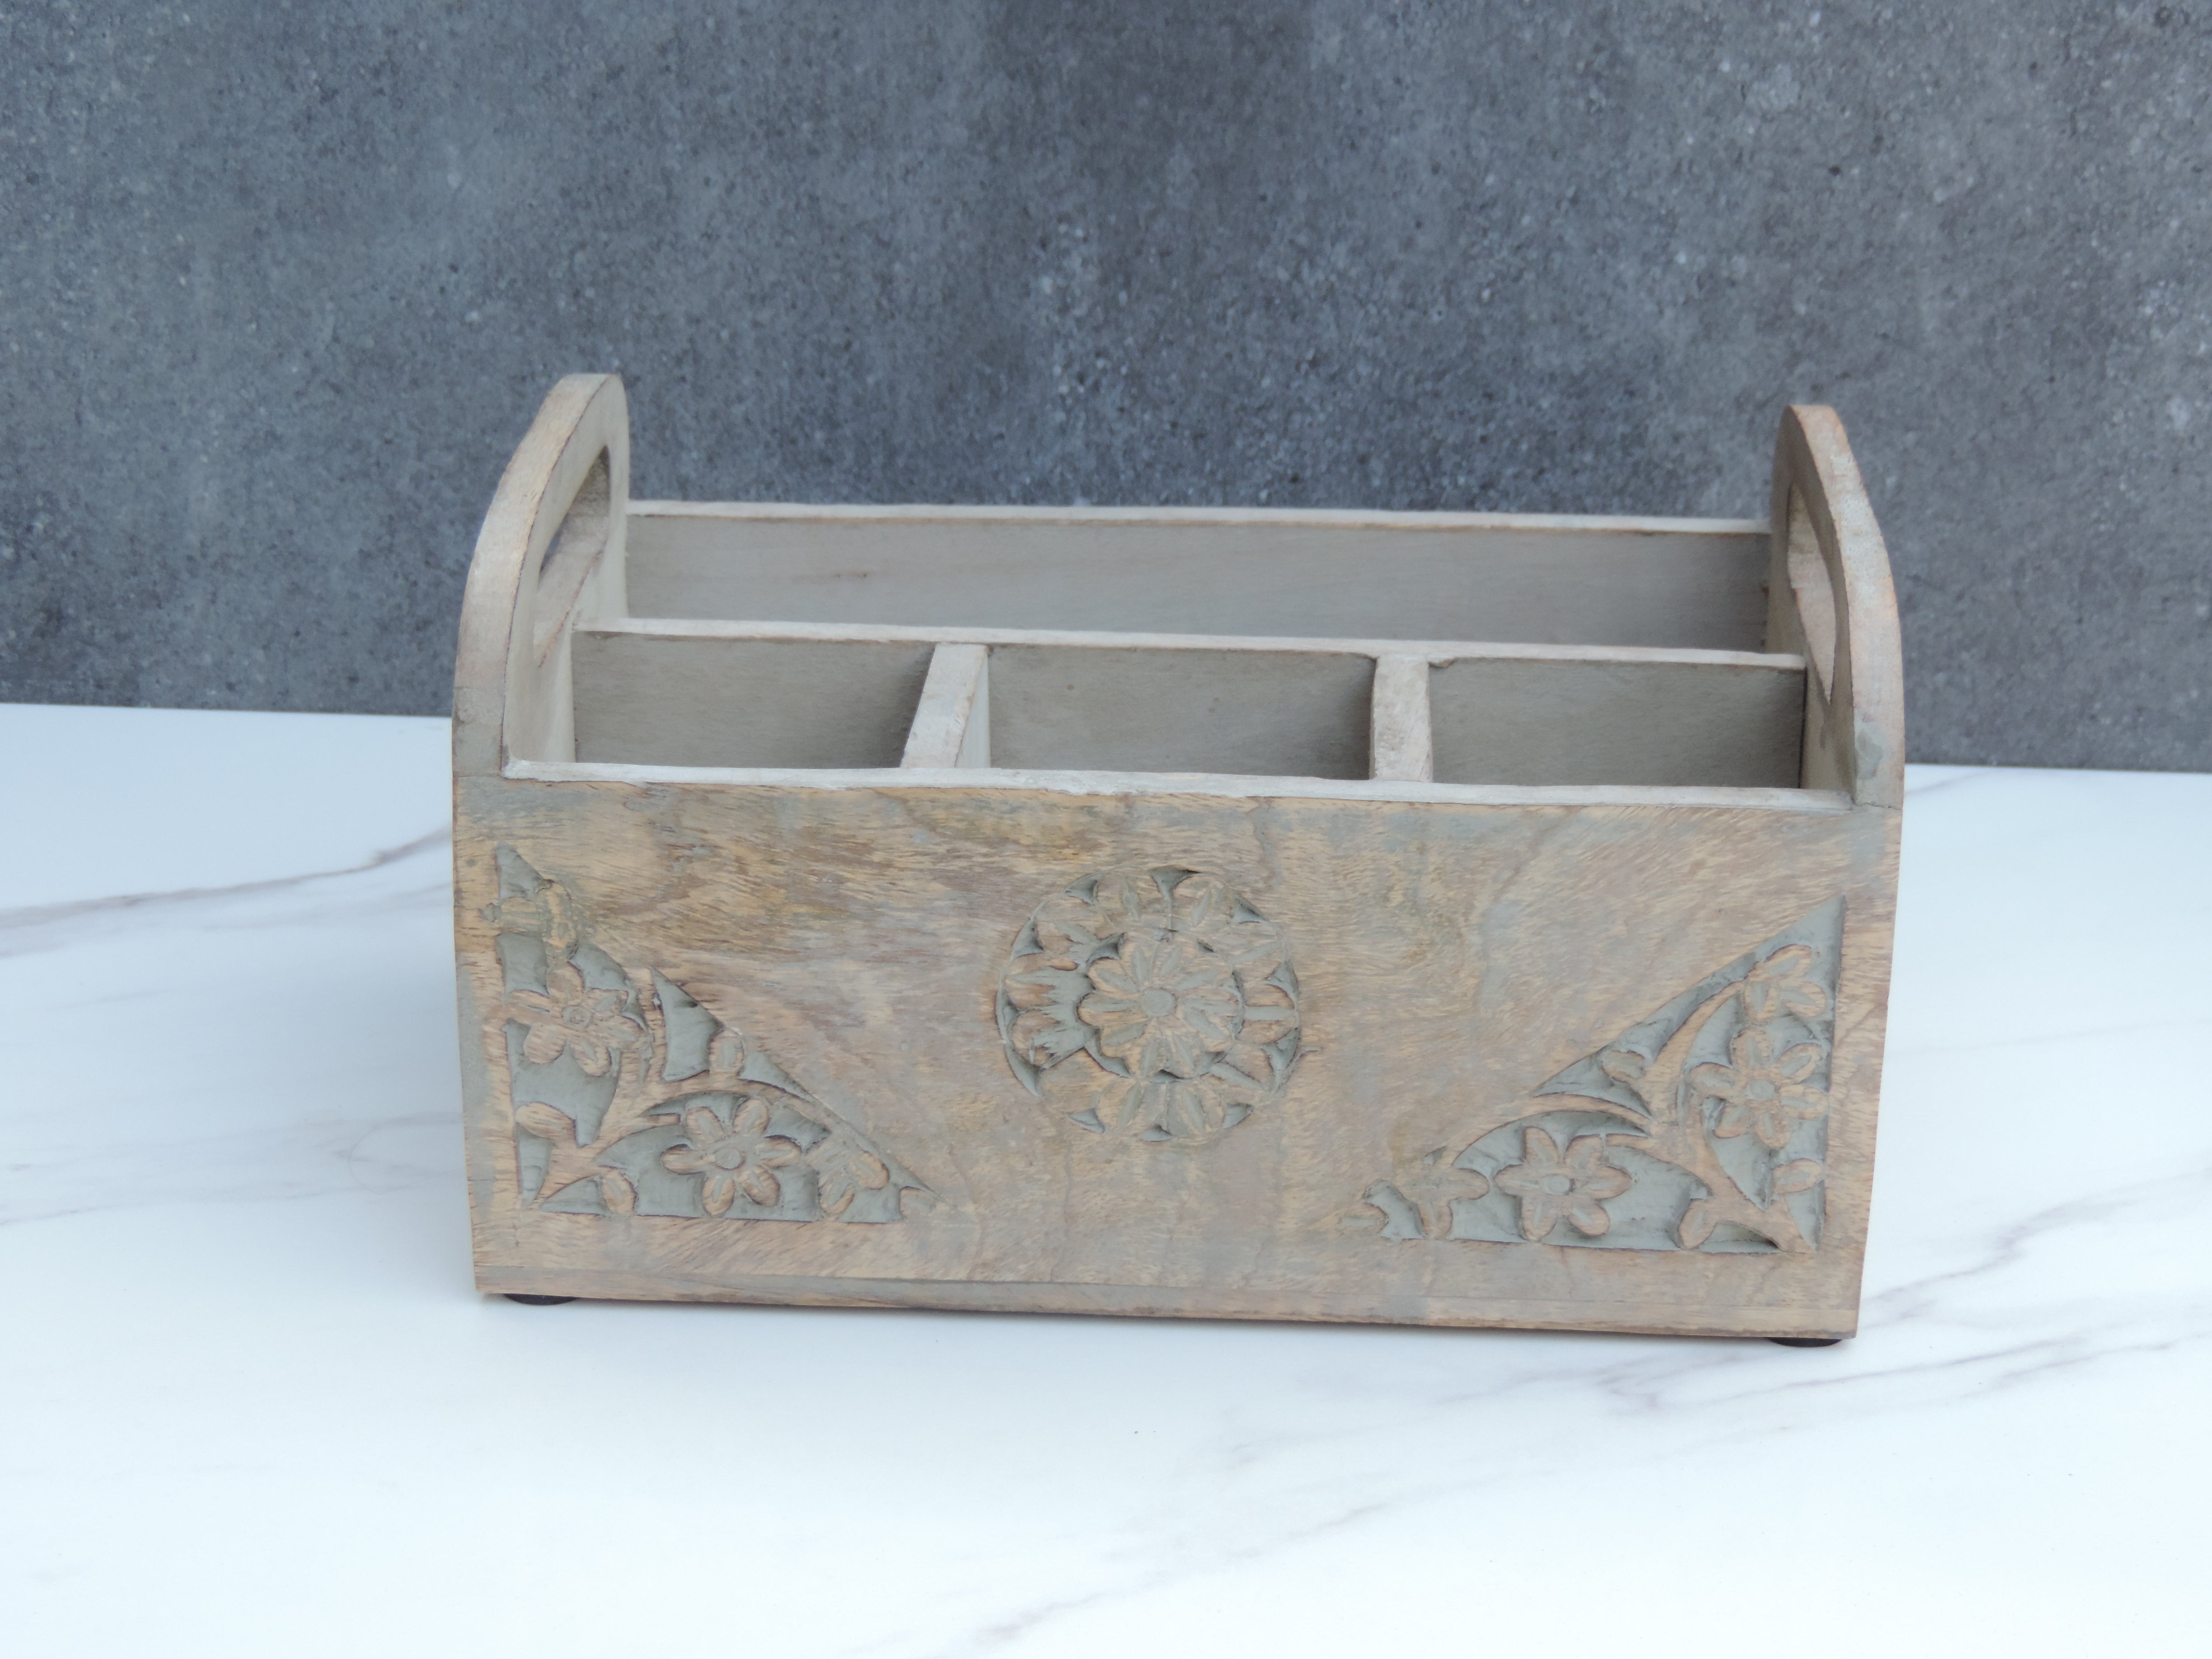 Wooden Carved 4 compartment Cutlery Holder - 38*18*12 cm